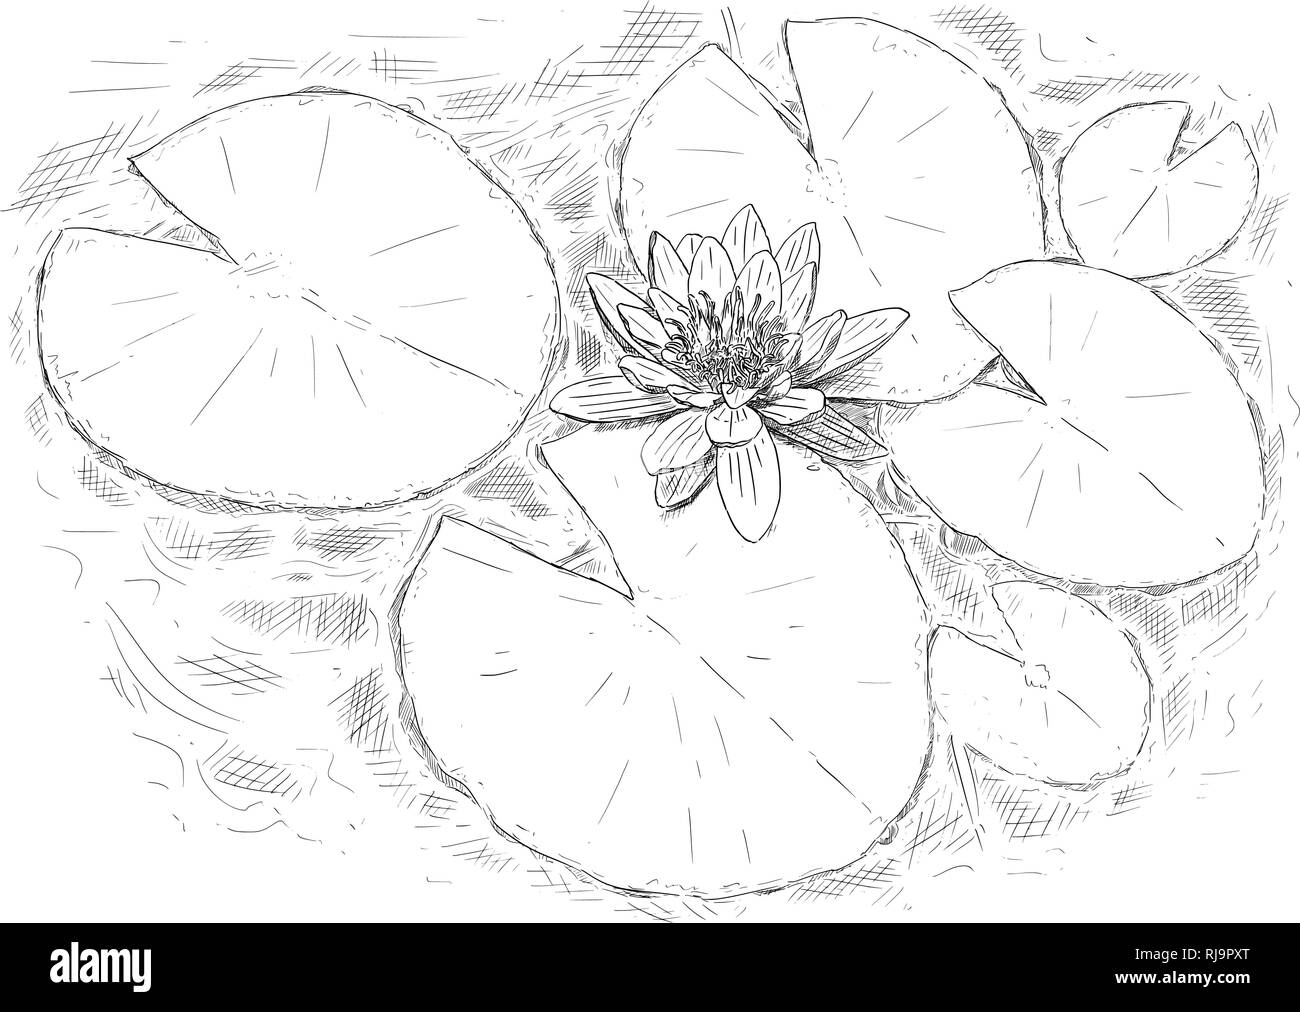 Drawing of nymphaea Plant Flower and Leaves on Water Stock Vector